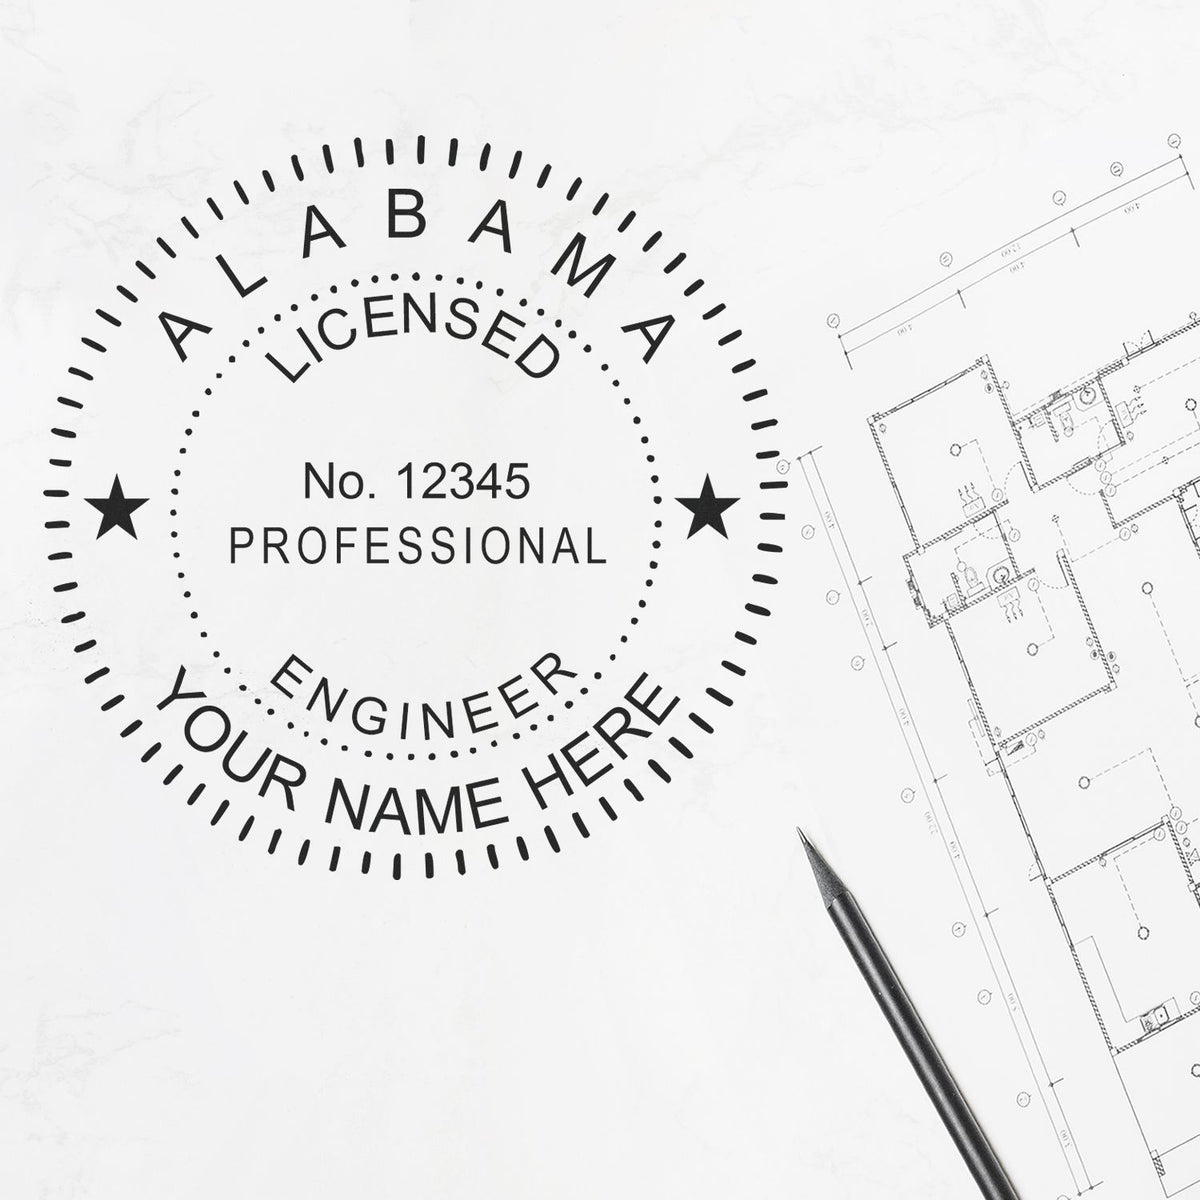 A stamped impression of the Slim Pre-Inked Alabama Professional Engineer Seal Stamp in this stylish lifestyle photo, setting the tone for a unique and personalized product.